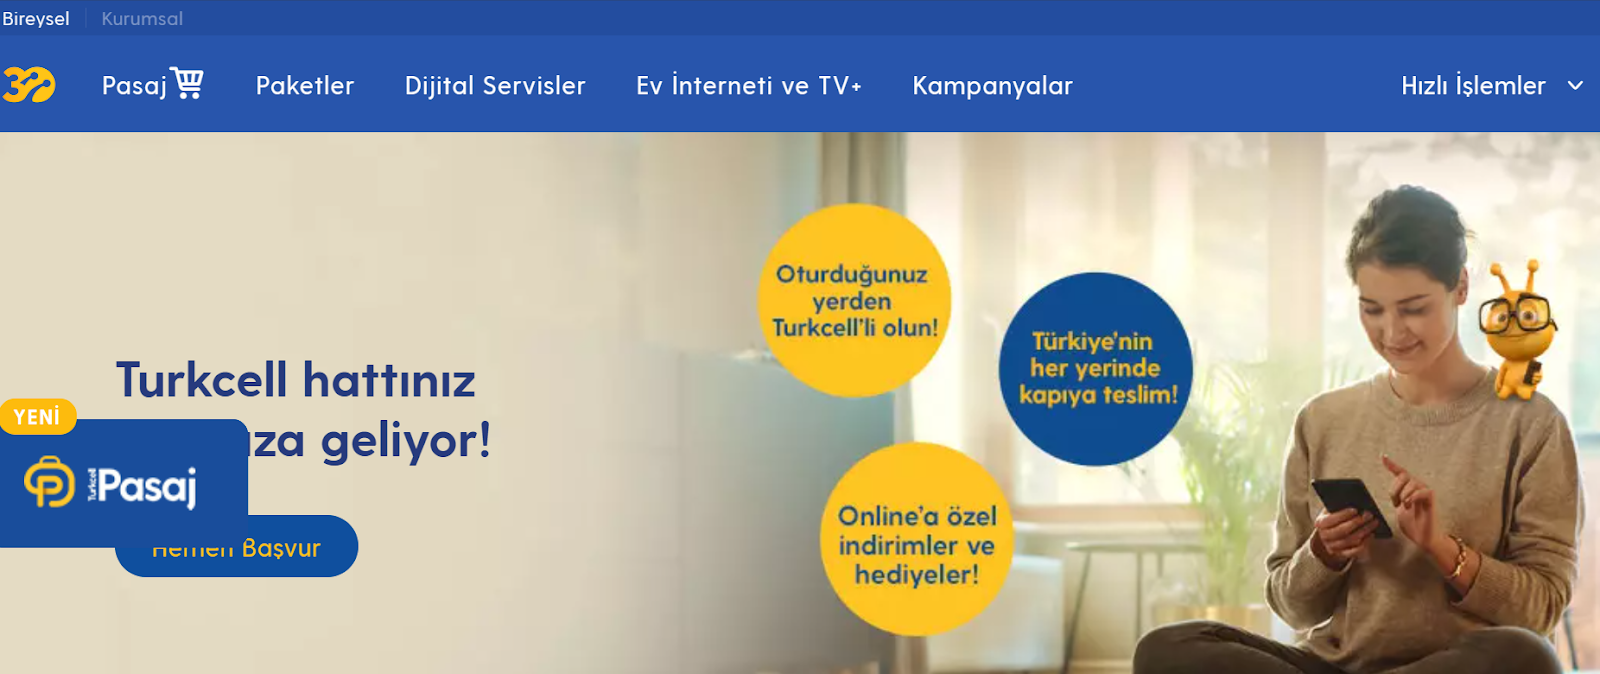 Turkcell website snapshot highlighting the services it offers.